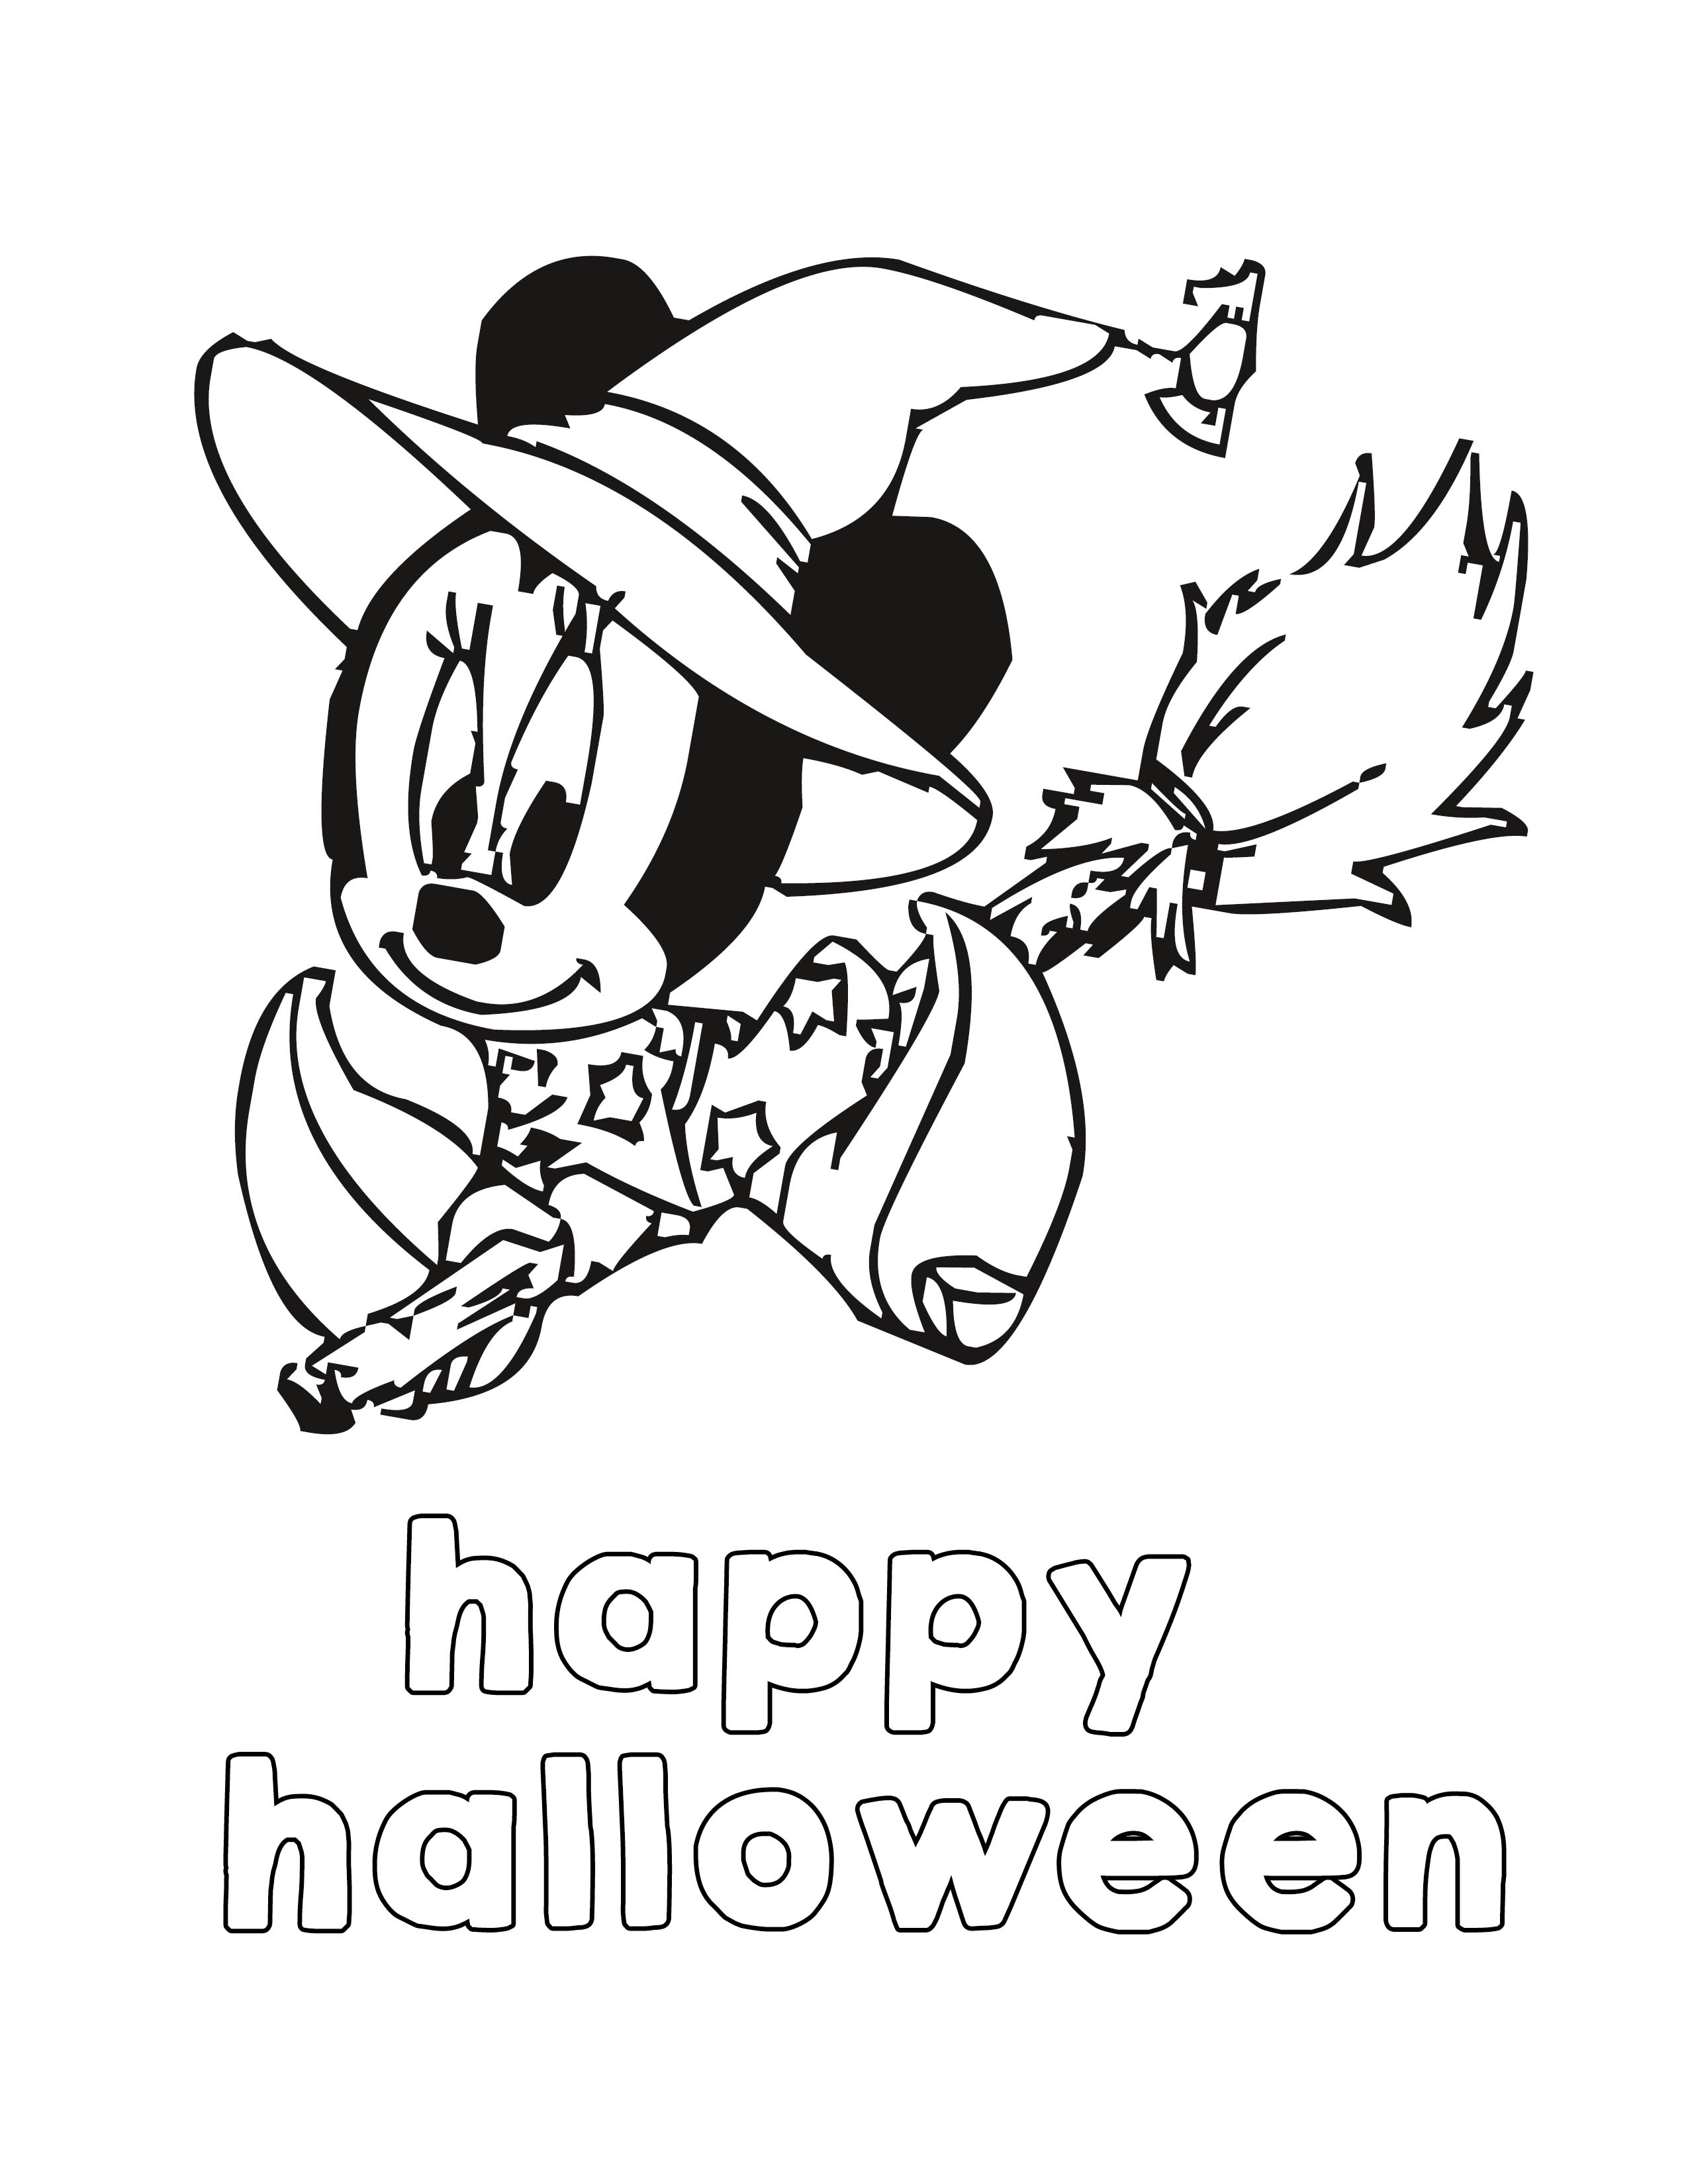 Halloween Coloring Pages -Disney Halloween- free printable coloring pages for kids - Misty Nelson @frostedevents